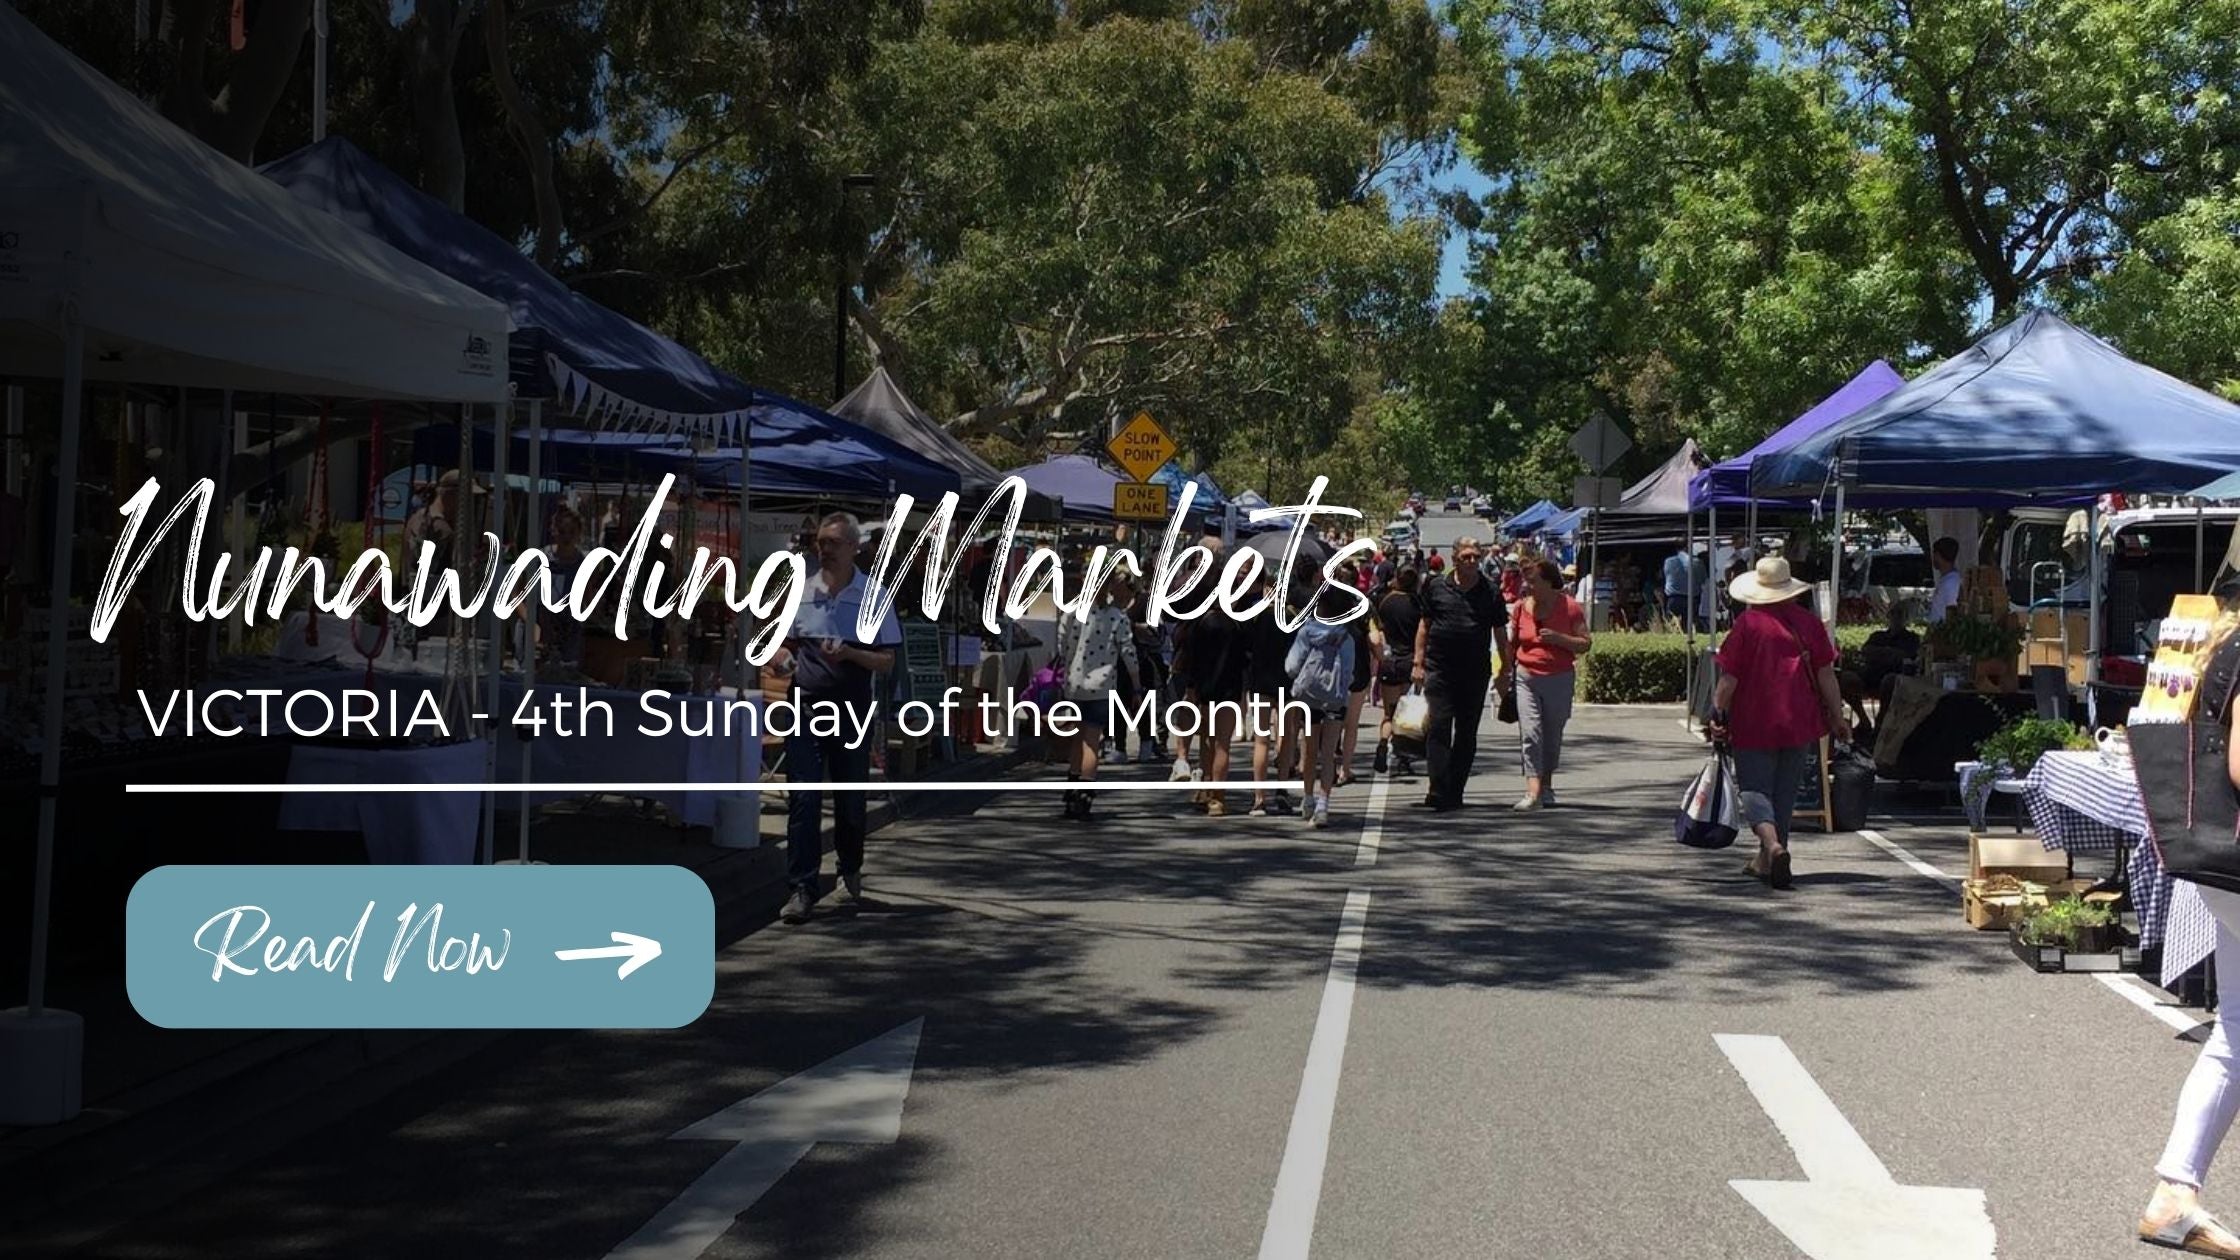 Discover the Nunawading Market, VIC